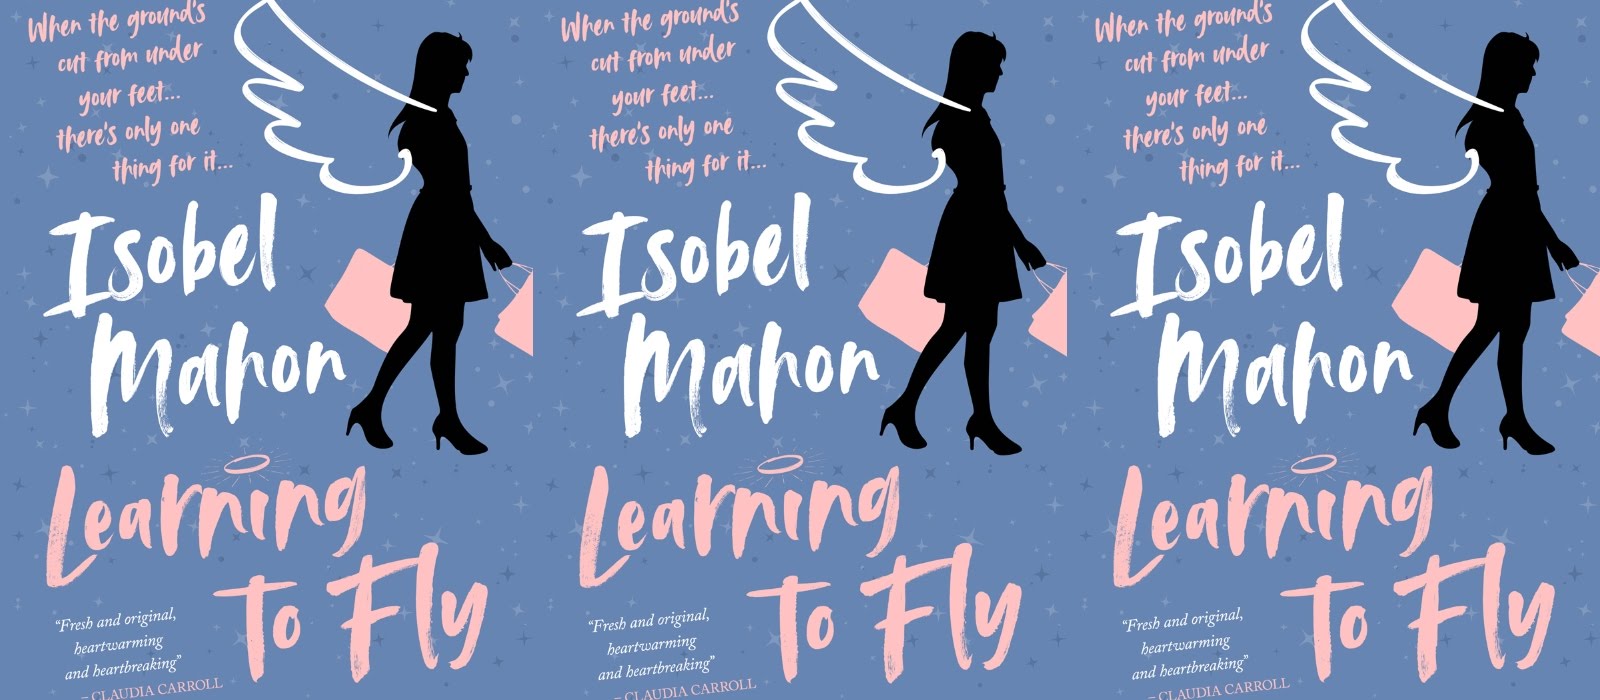 IMAGE Book Club: Read an extract from Isobel Mahon’s debut novel ‘Learning to Fly’